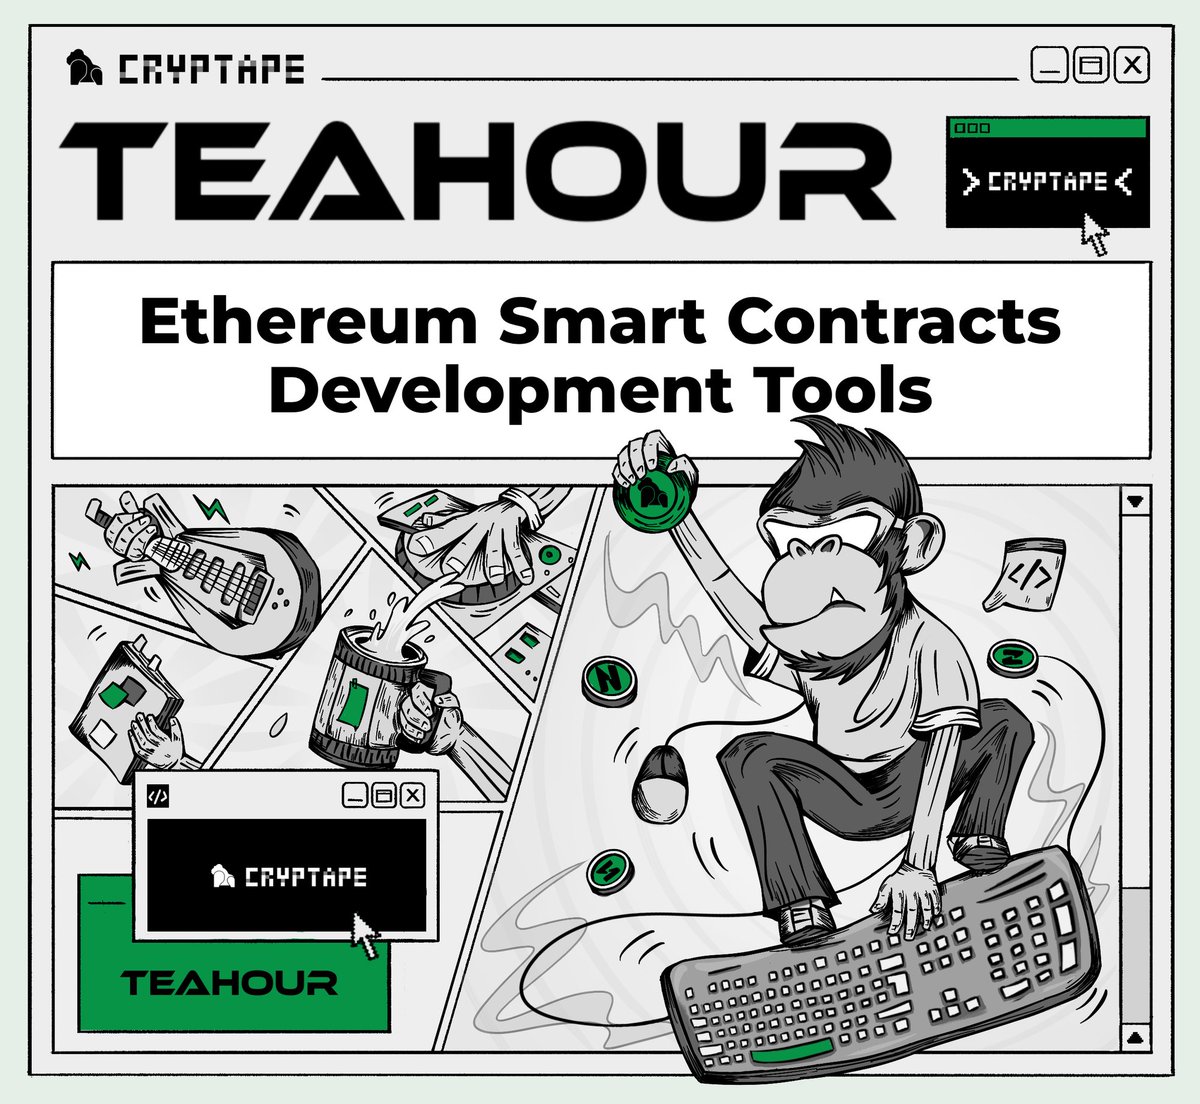 Learned from a #Cryptape engineer in #Teahour how to enhance #Ethereum #smartcontracts development workflow using tools like:
✅REMIX
✅Truffle
✅Waffle
✅Hardhat
✅Ganache

Share your favorite tools🚀